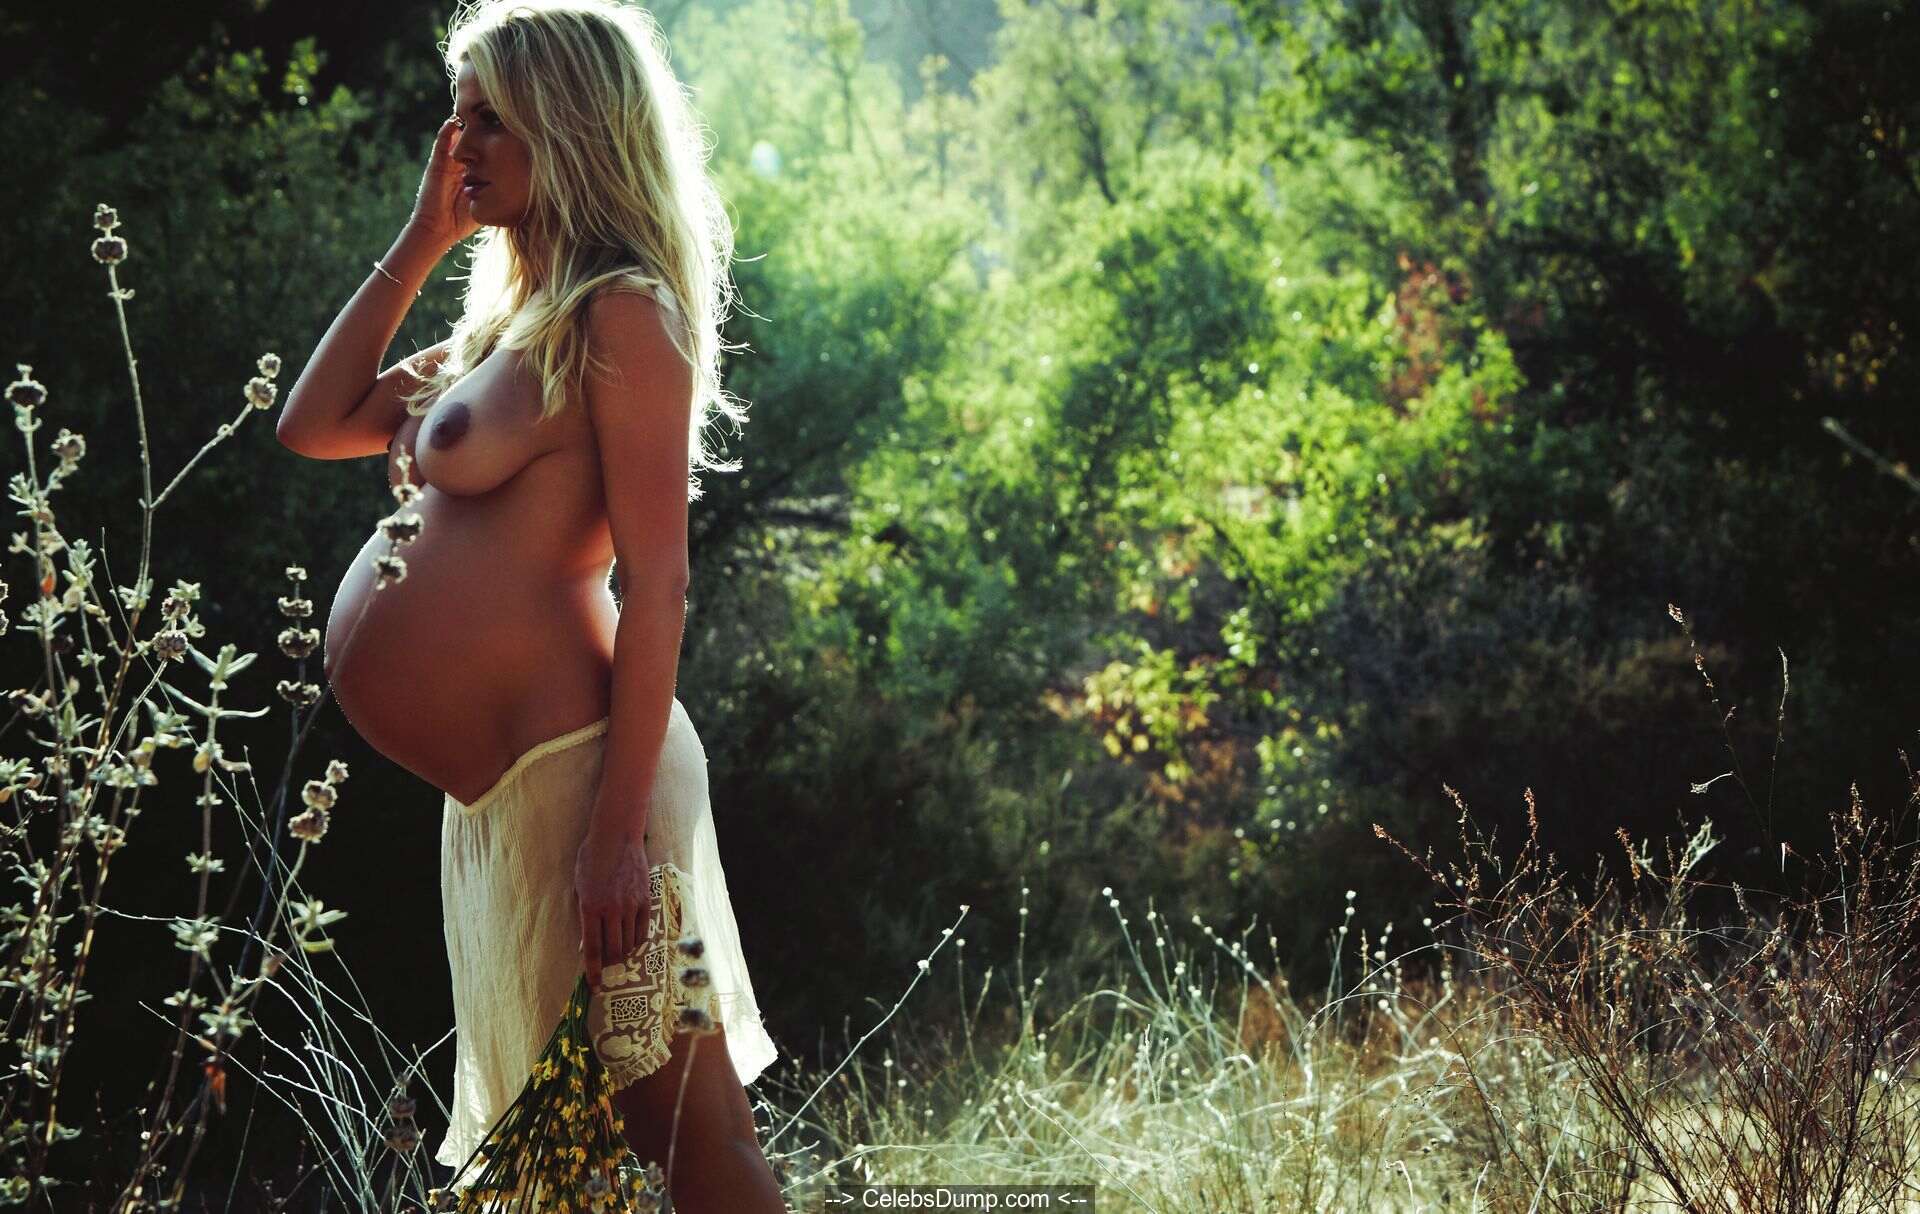 Chelsea Salmon extremely pregnant nude photoshoot for Treats! 